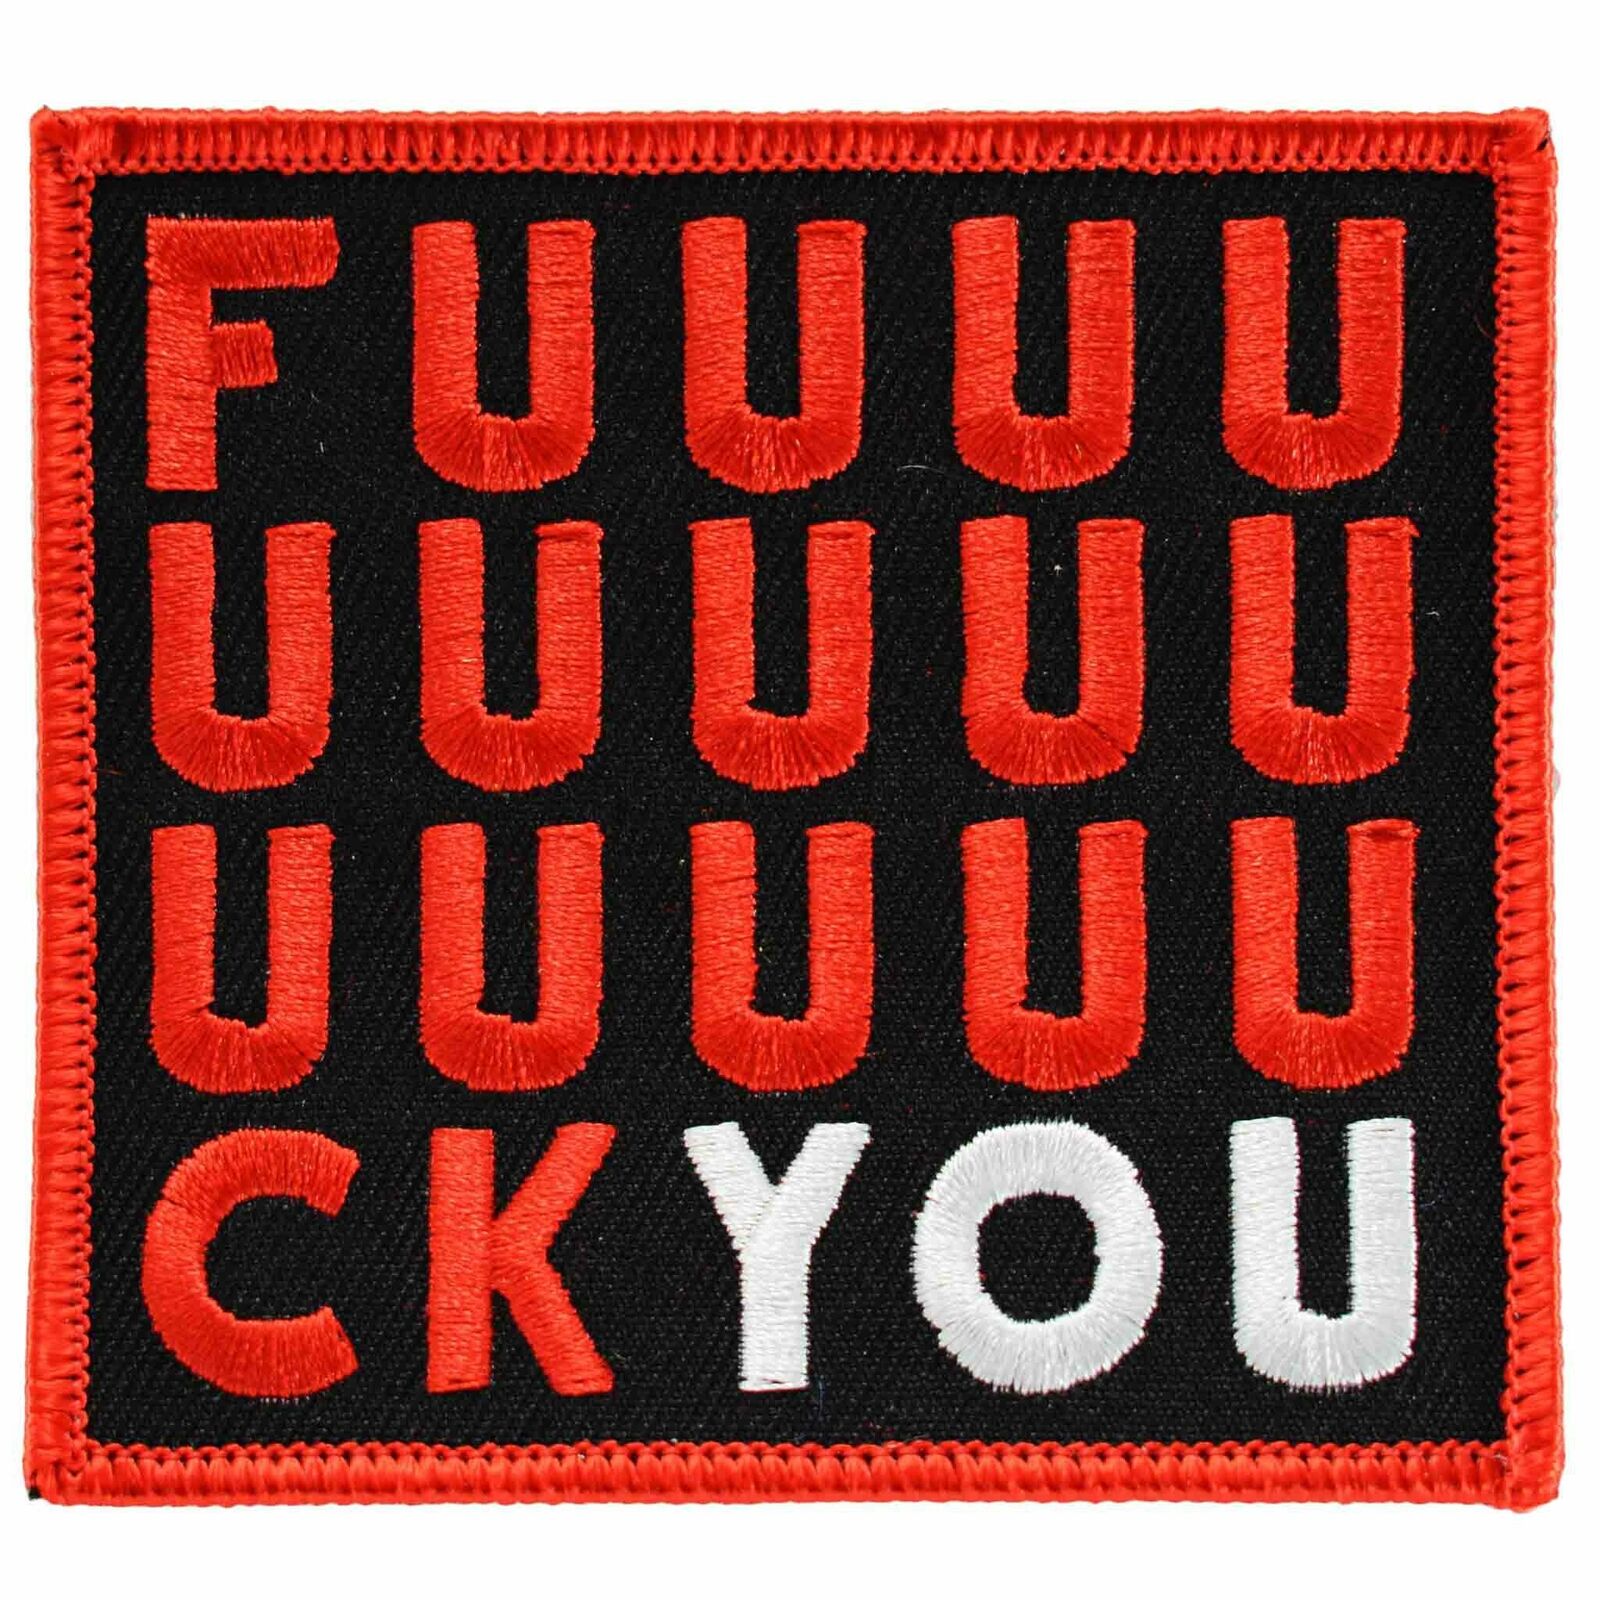 Sourpuss F*ck You Iron On Patch Rude Punk Gothic Rockabilly Tattoo Embroidered